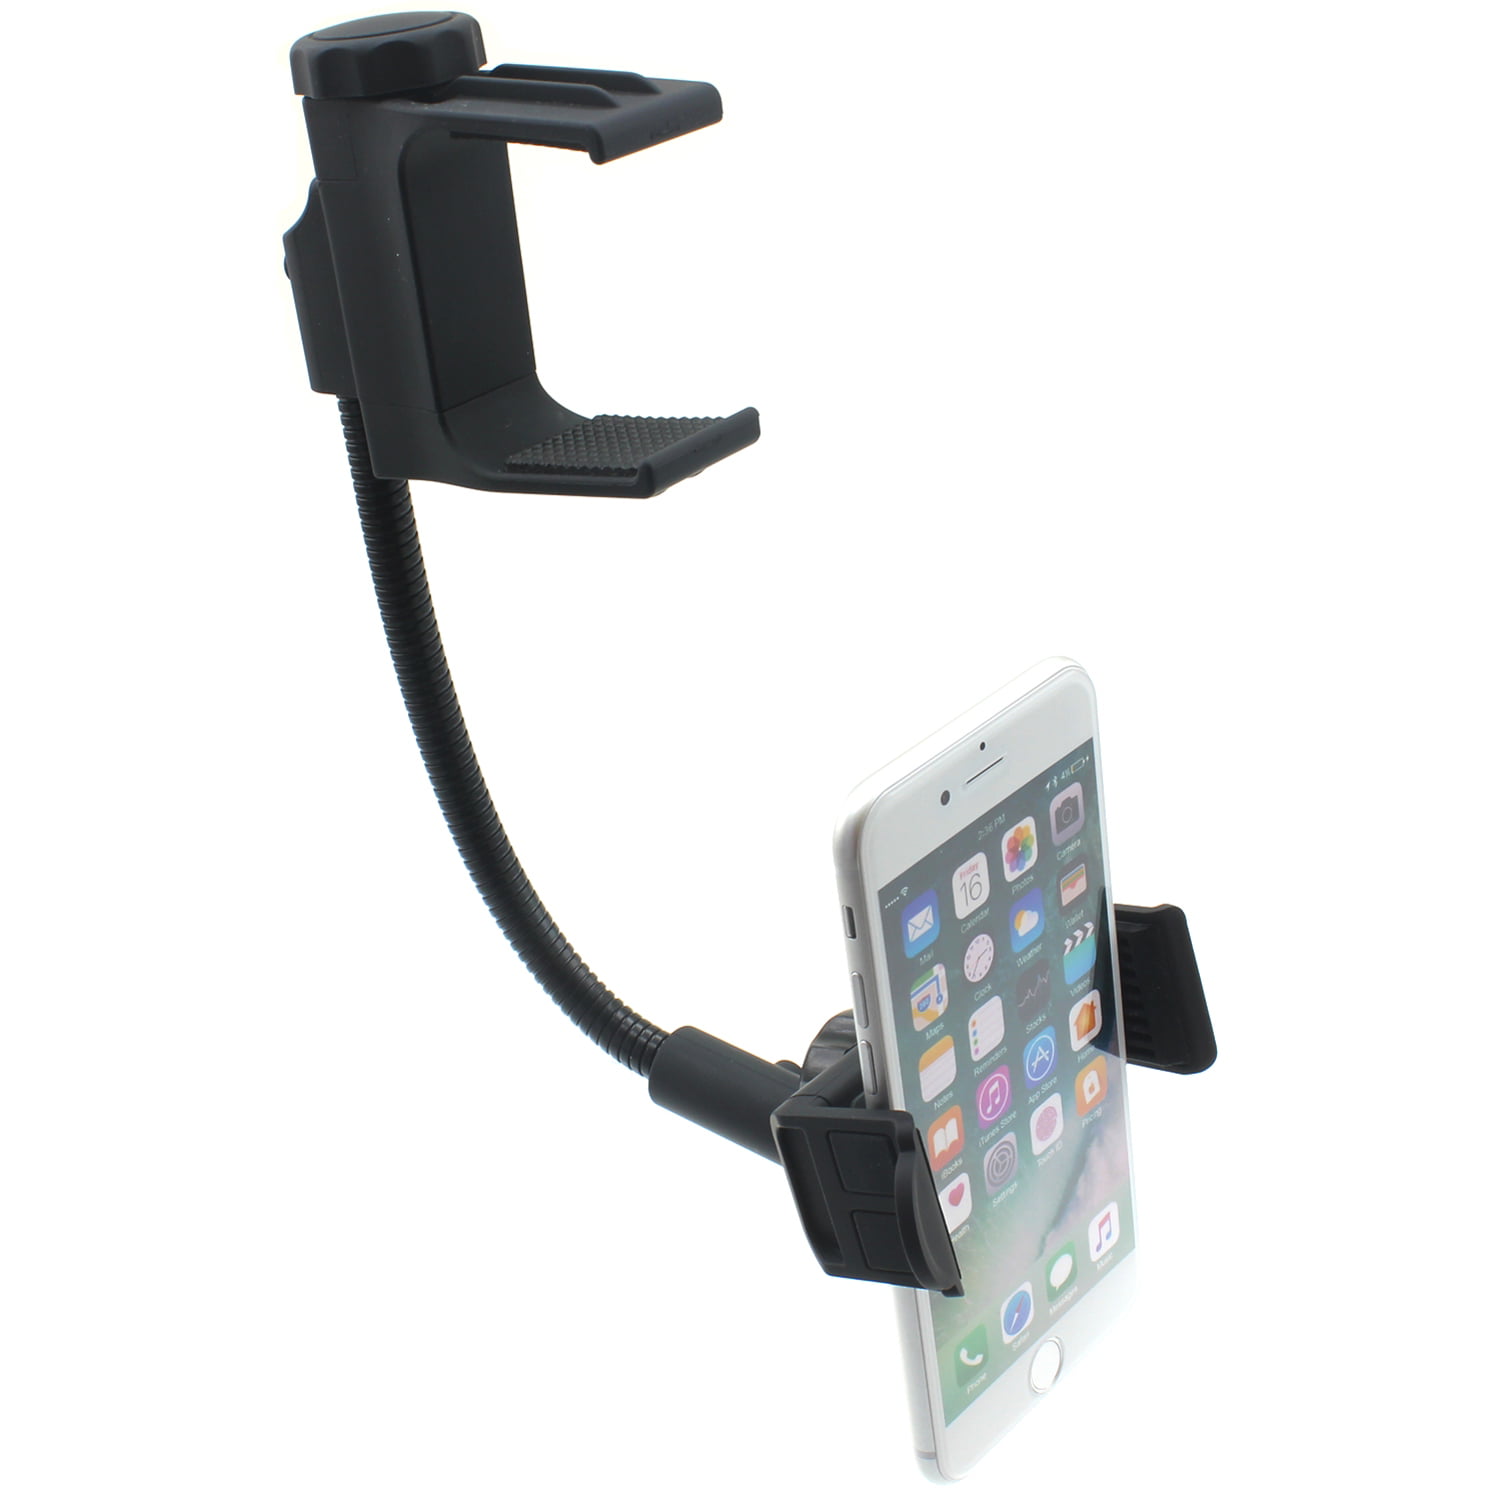 Car Rear View Mirror Mount Cradle Holder Bracket Universal For Phone iPhone LG